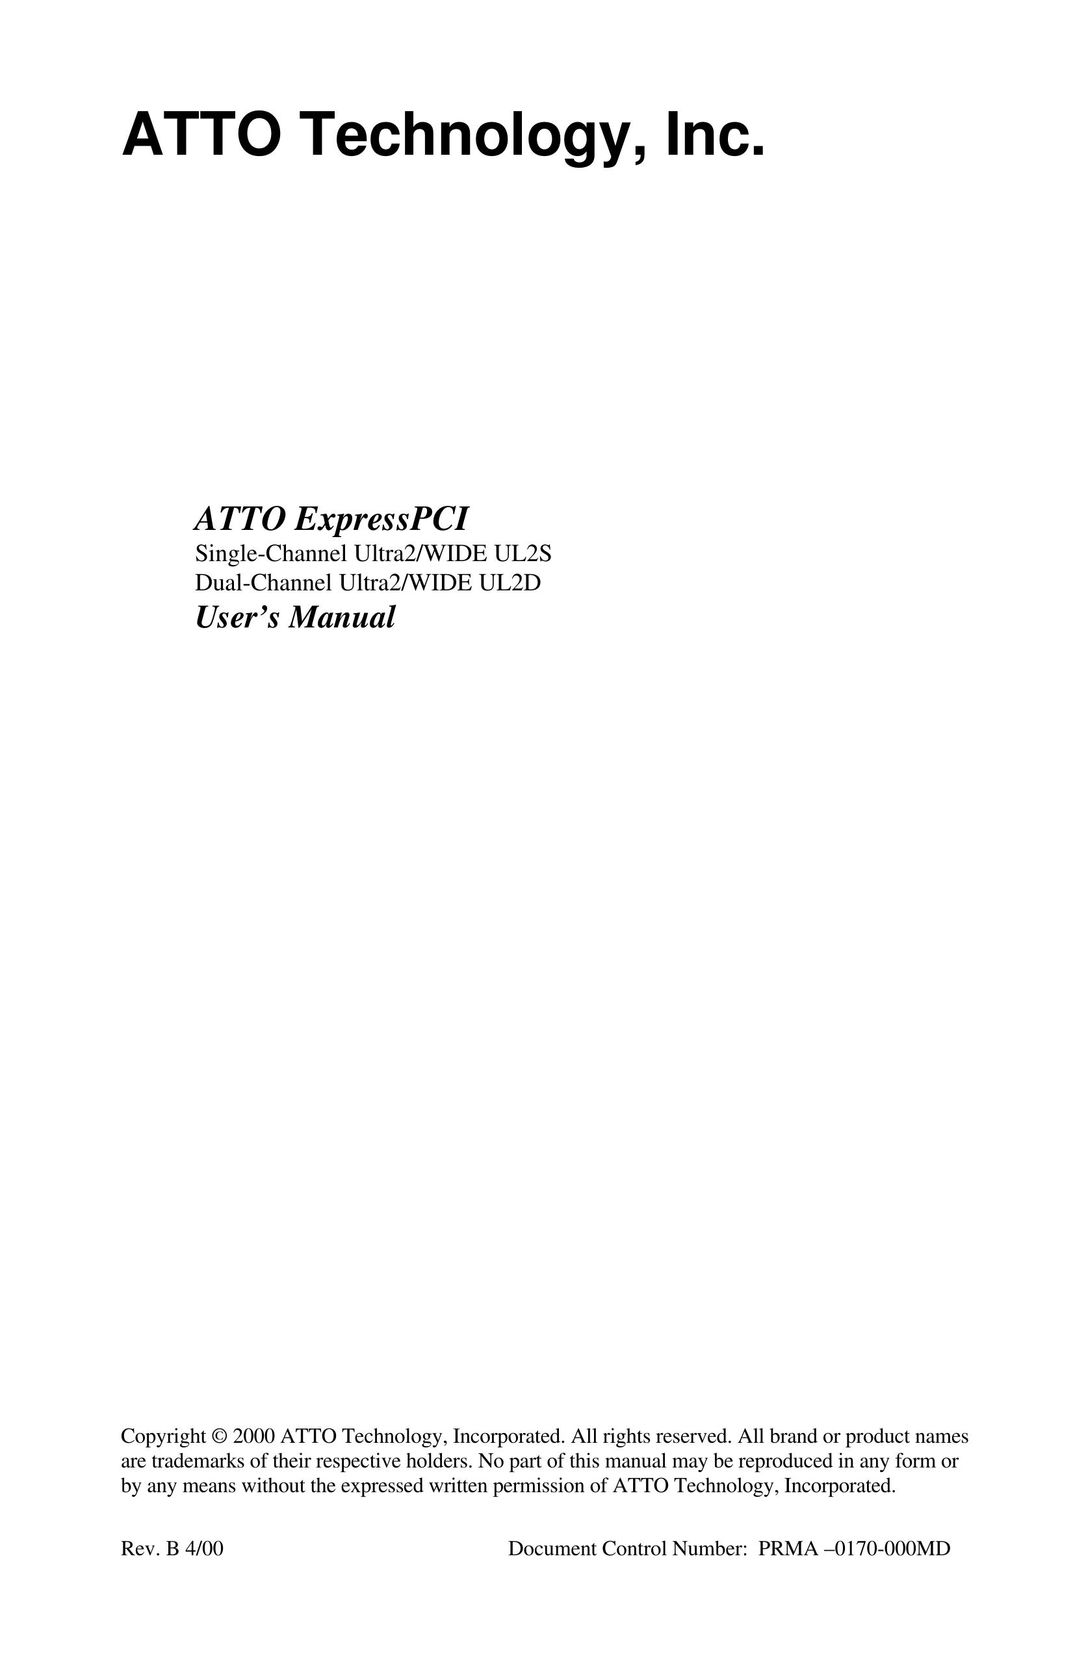 ATTO Technology UL25 Network Card User Manual